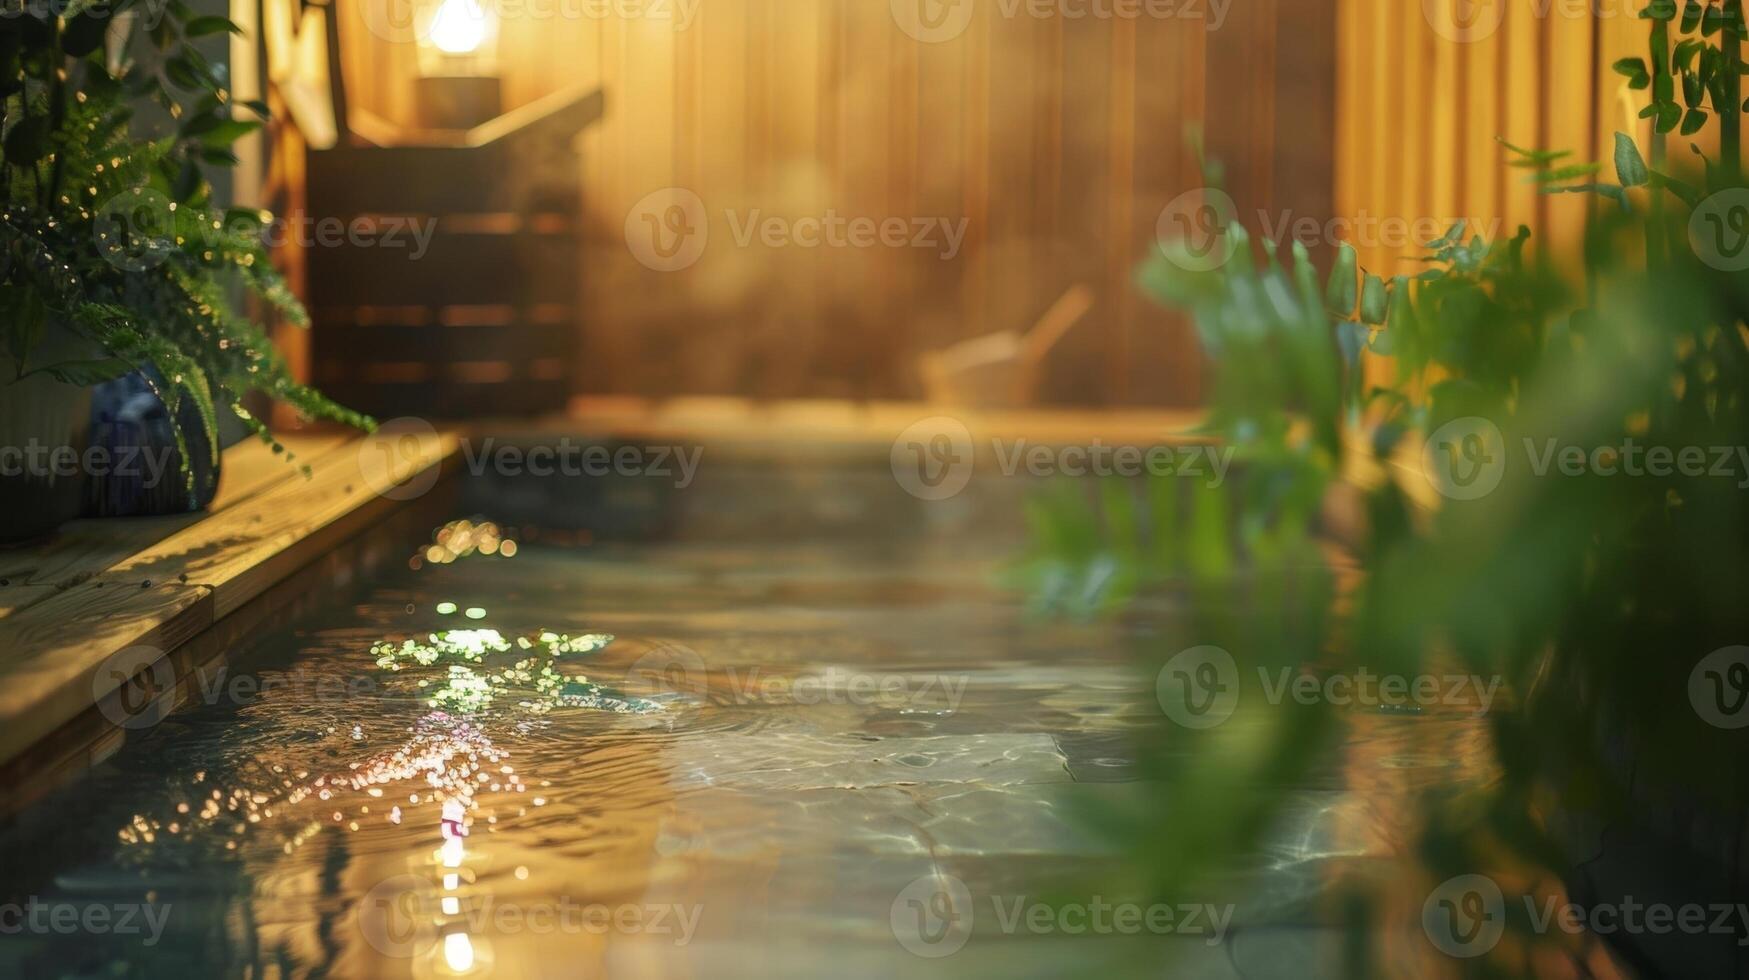 The sound of gentle nature sounds playing in the background creating a tranquil atmosphere in the sauna. photo